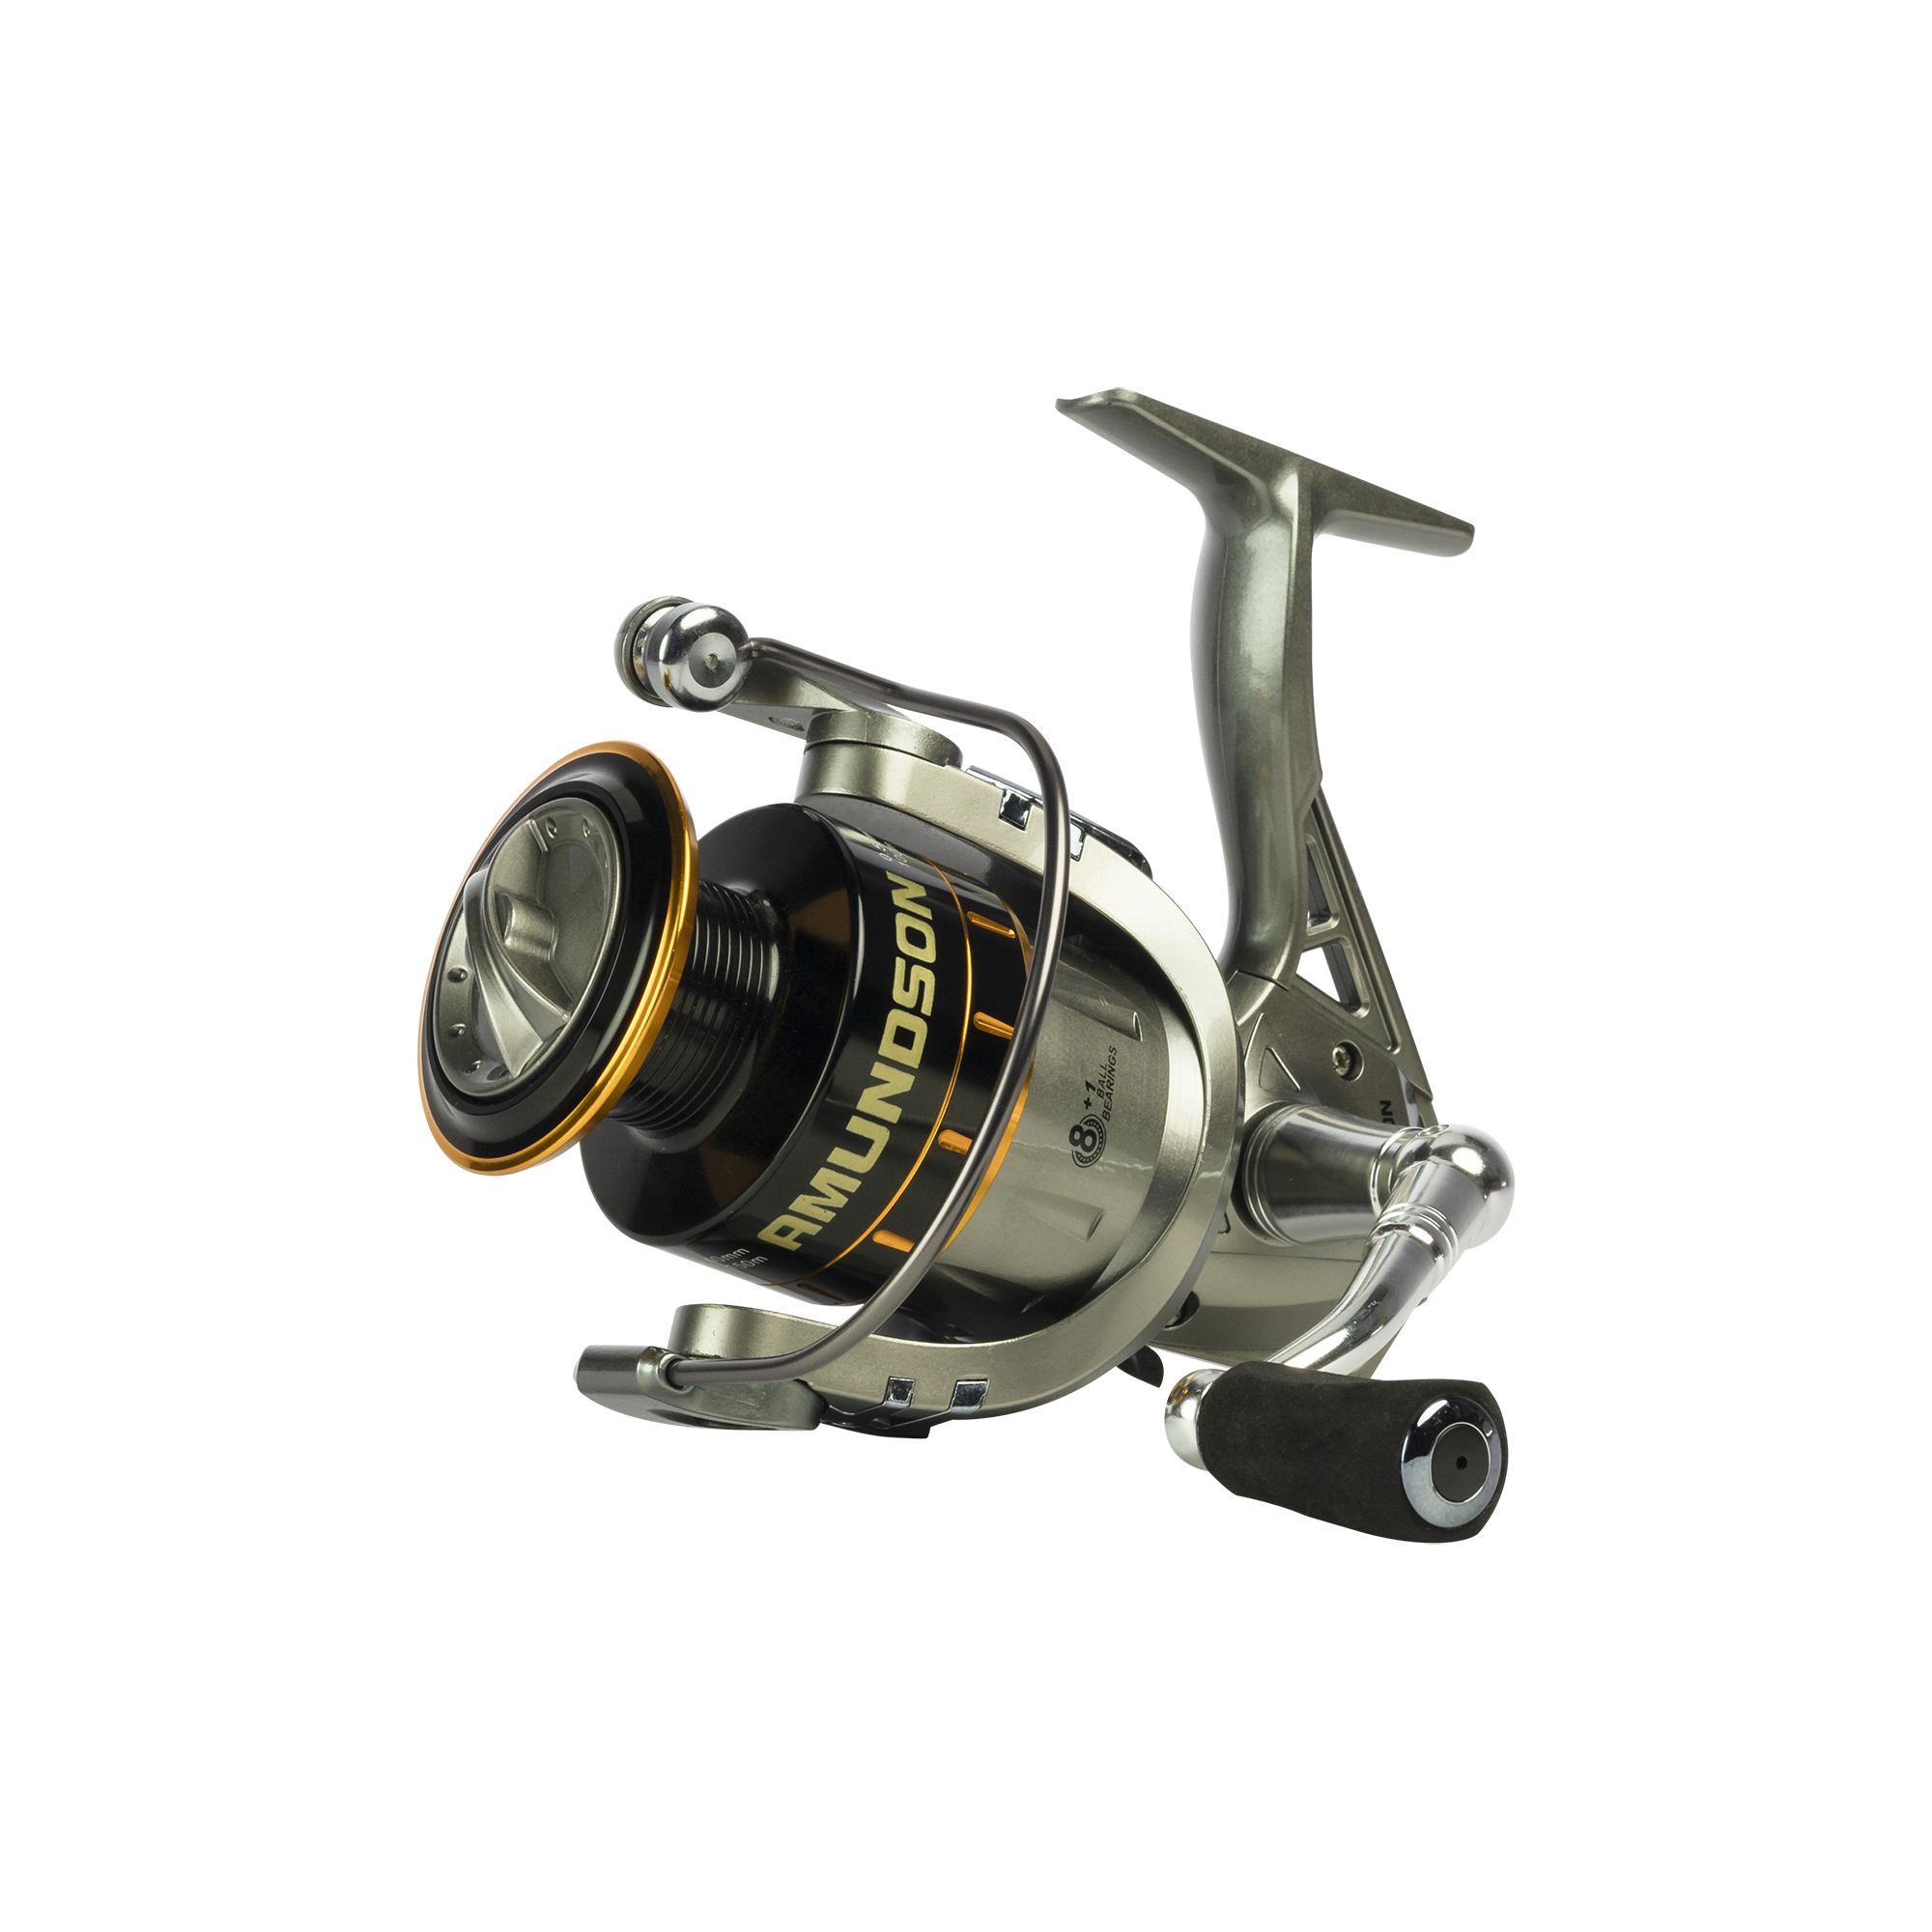 Rovex Endurance Reels, Budget reels can be hit and miss, but the  construction and performance of these Rovex Endurance reels has them up the  top for value for money. There are